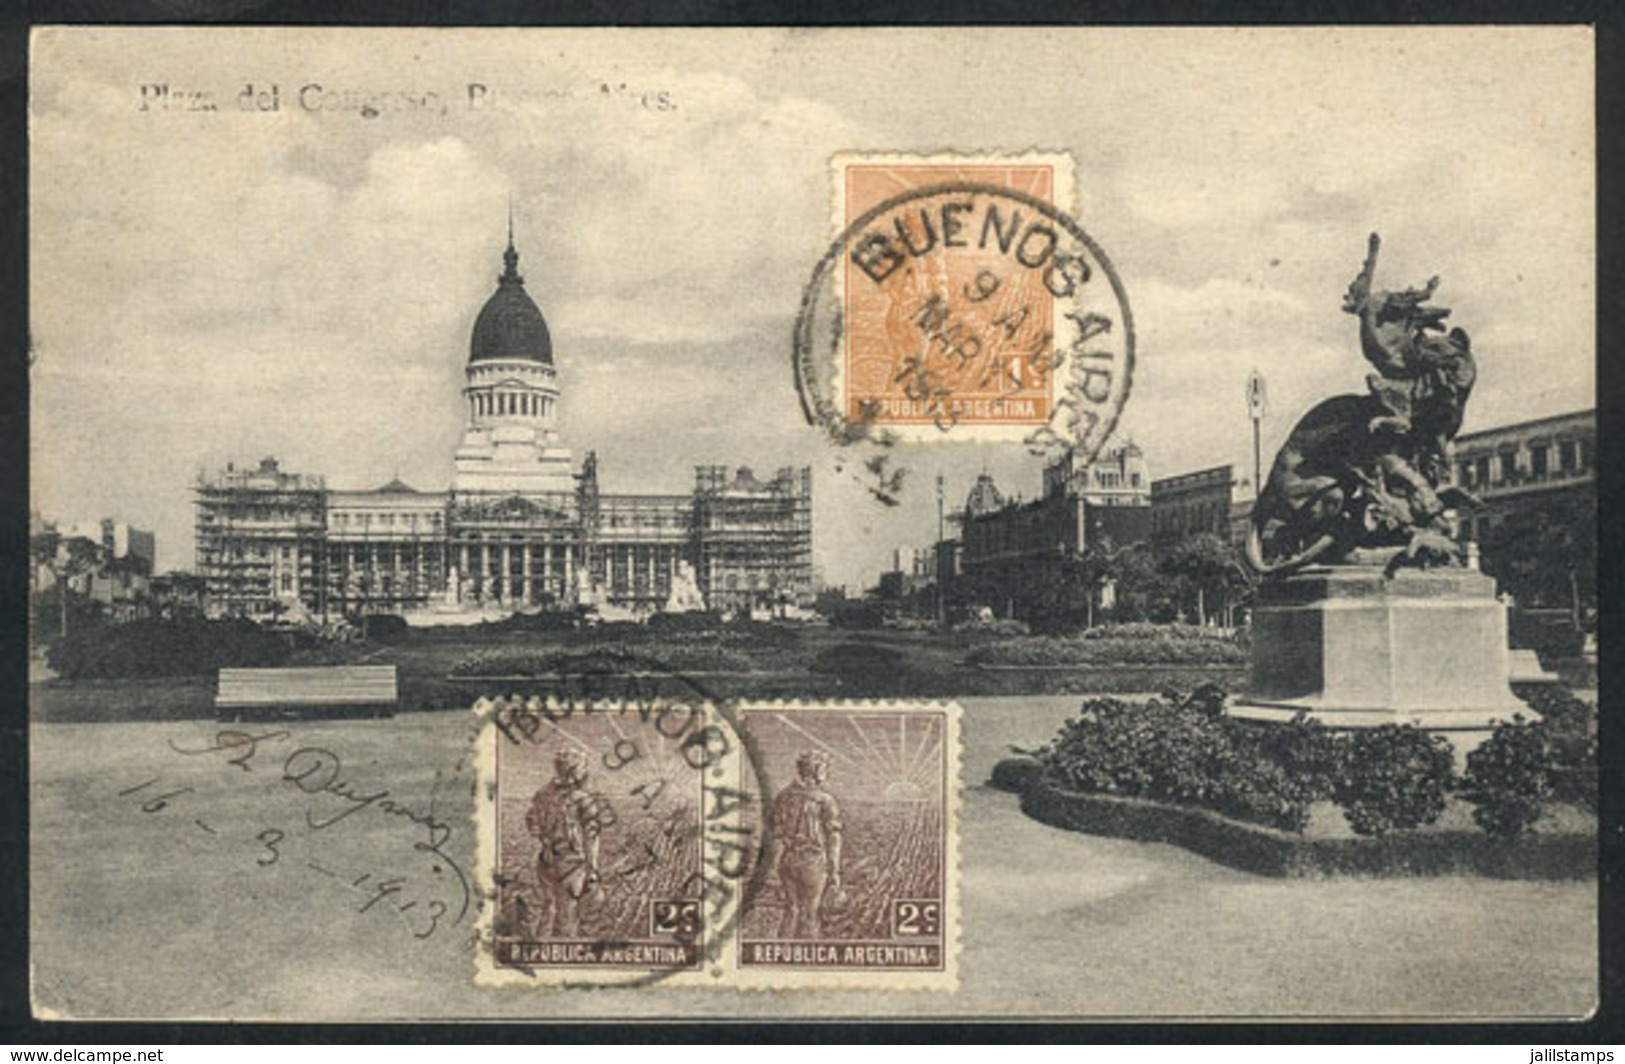 175 ARGENTINA: BUENOS AIRES: Congreso Square, Ed. Ibarra & Sorroche, Sent To Italy In 191 - Argentina